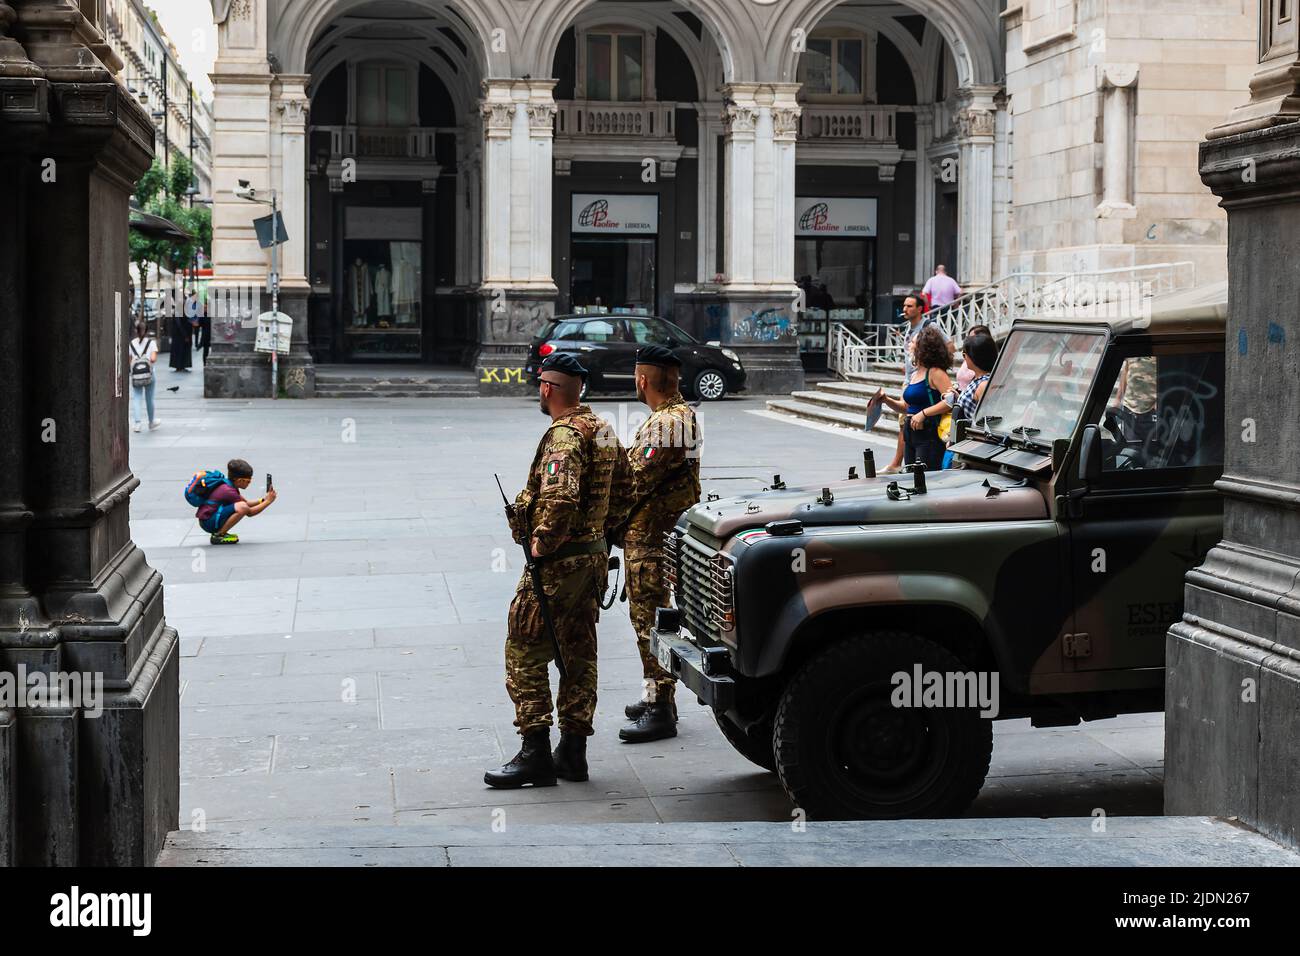 Naples, Italy. May 27, 2022. Two soldiers, a military vehicle and a kid taking a photograph on the square in front of The Naples Cathedral (Duomo di N Stock Photo